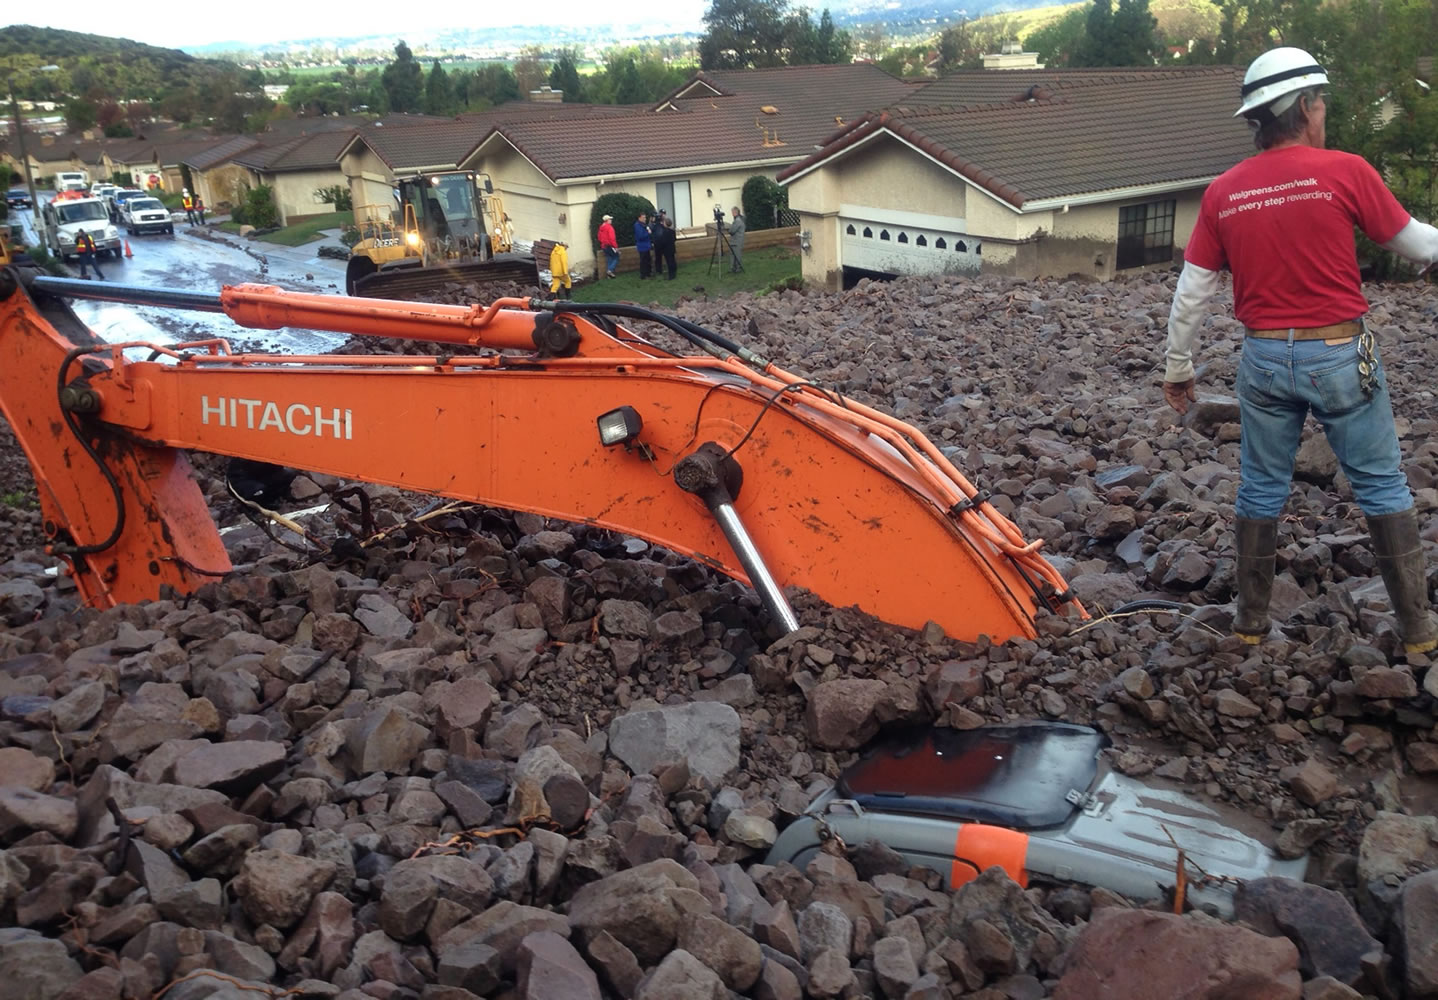 Earth-moving equipment is buried by a debris flow Friday in Camarillo Springs, Calif., about 50 miles northwest of Los Angeles. A soaking storm swept into Southern California, causing several mudslides, flooding streets and cutting power to tens of thousands Friday after lashing the rest of the state with much-needed rain.